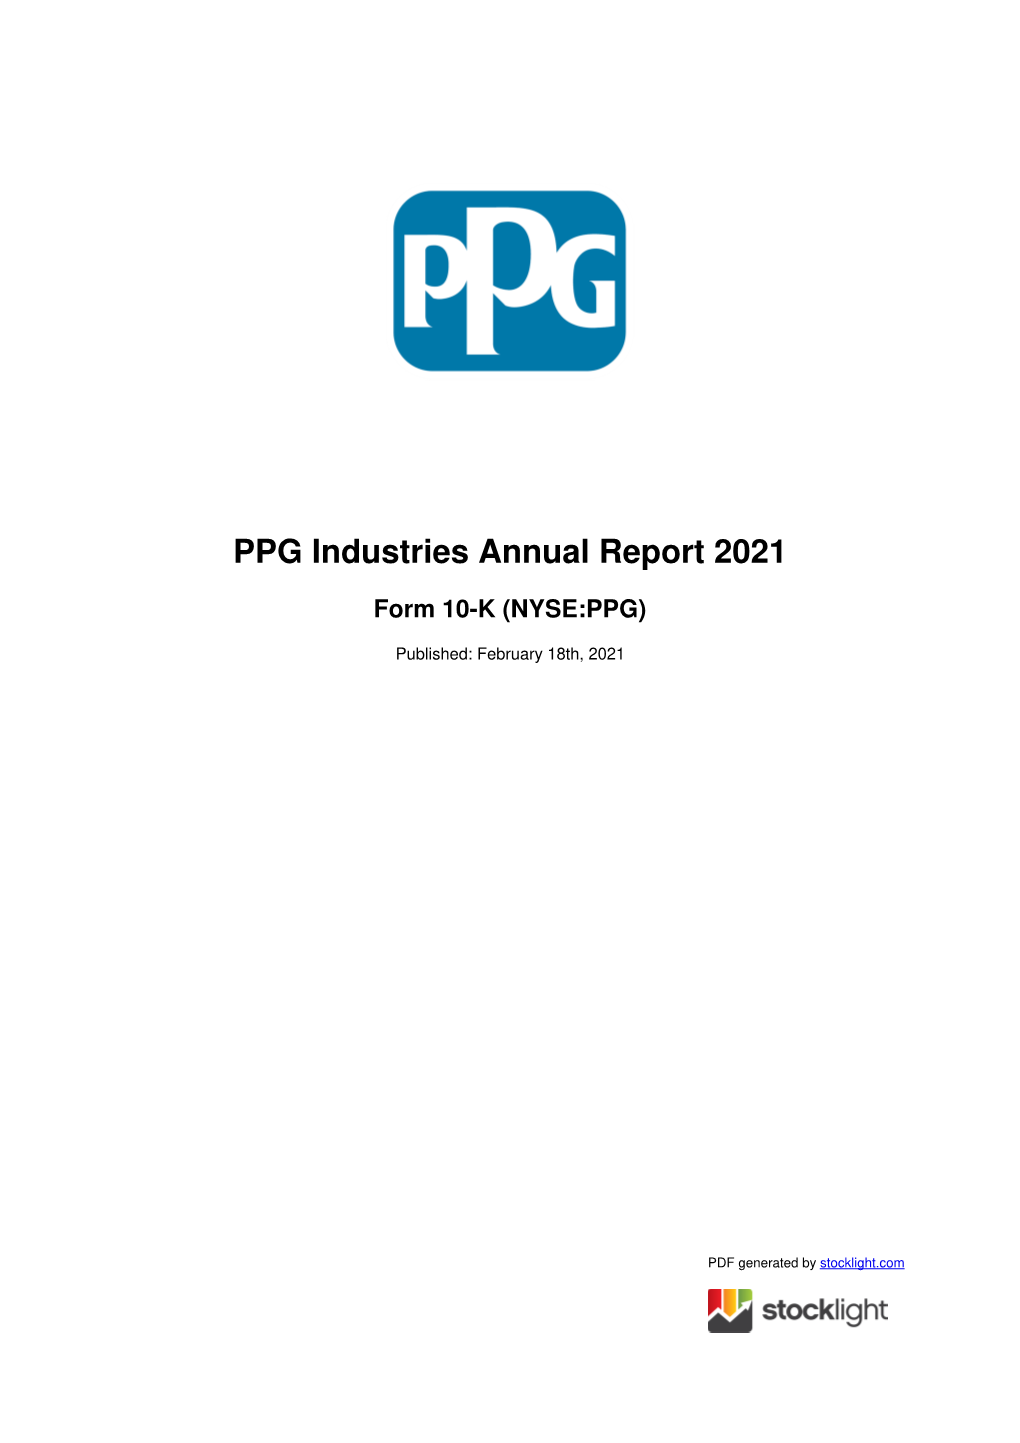 PPG Industries Annual Report 2021